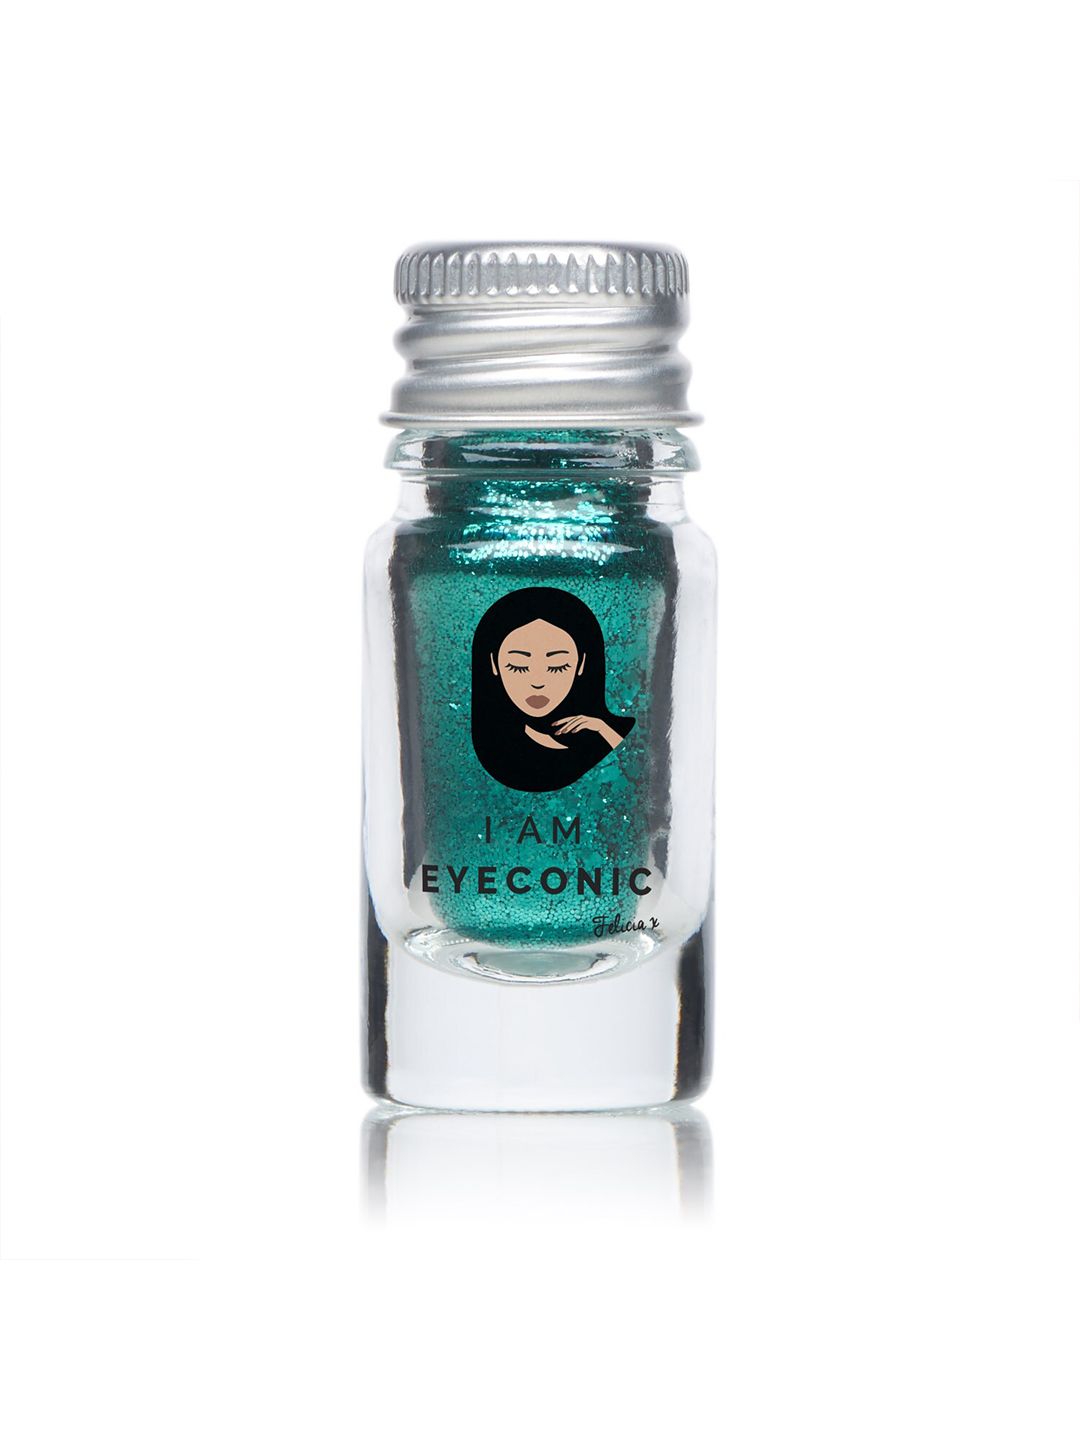 I AM EYECONIC 3D Cosmetic Glitters 4 g - Aquatic Price in India